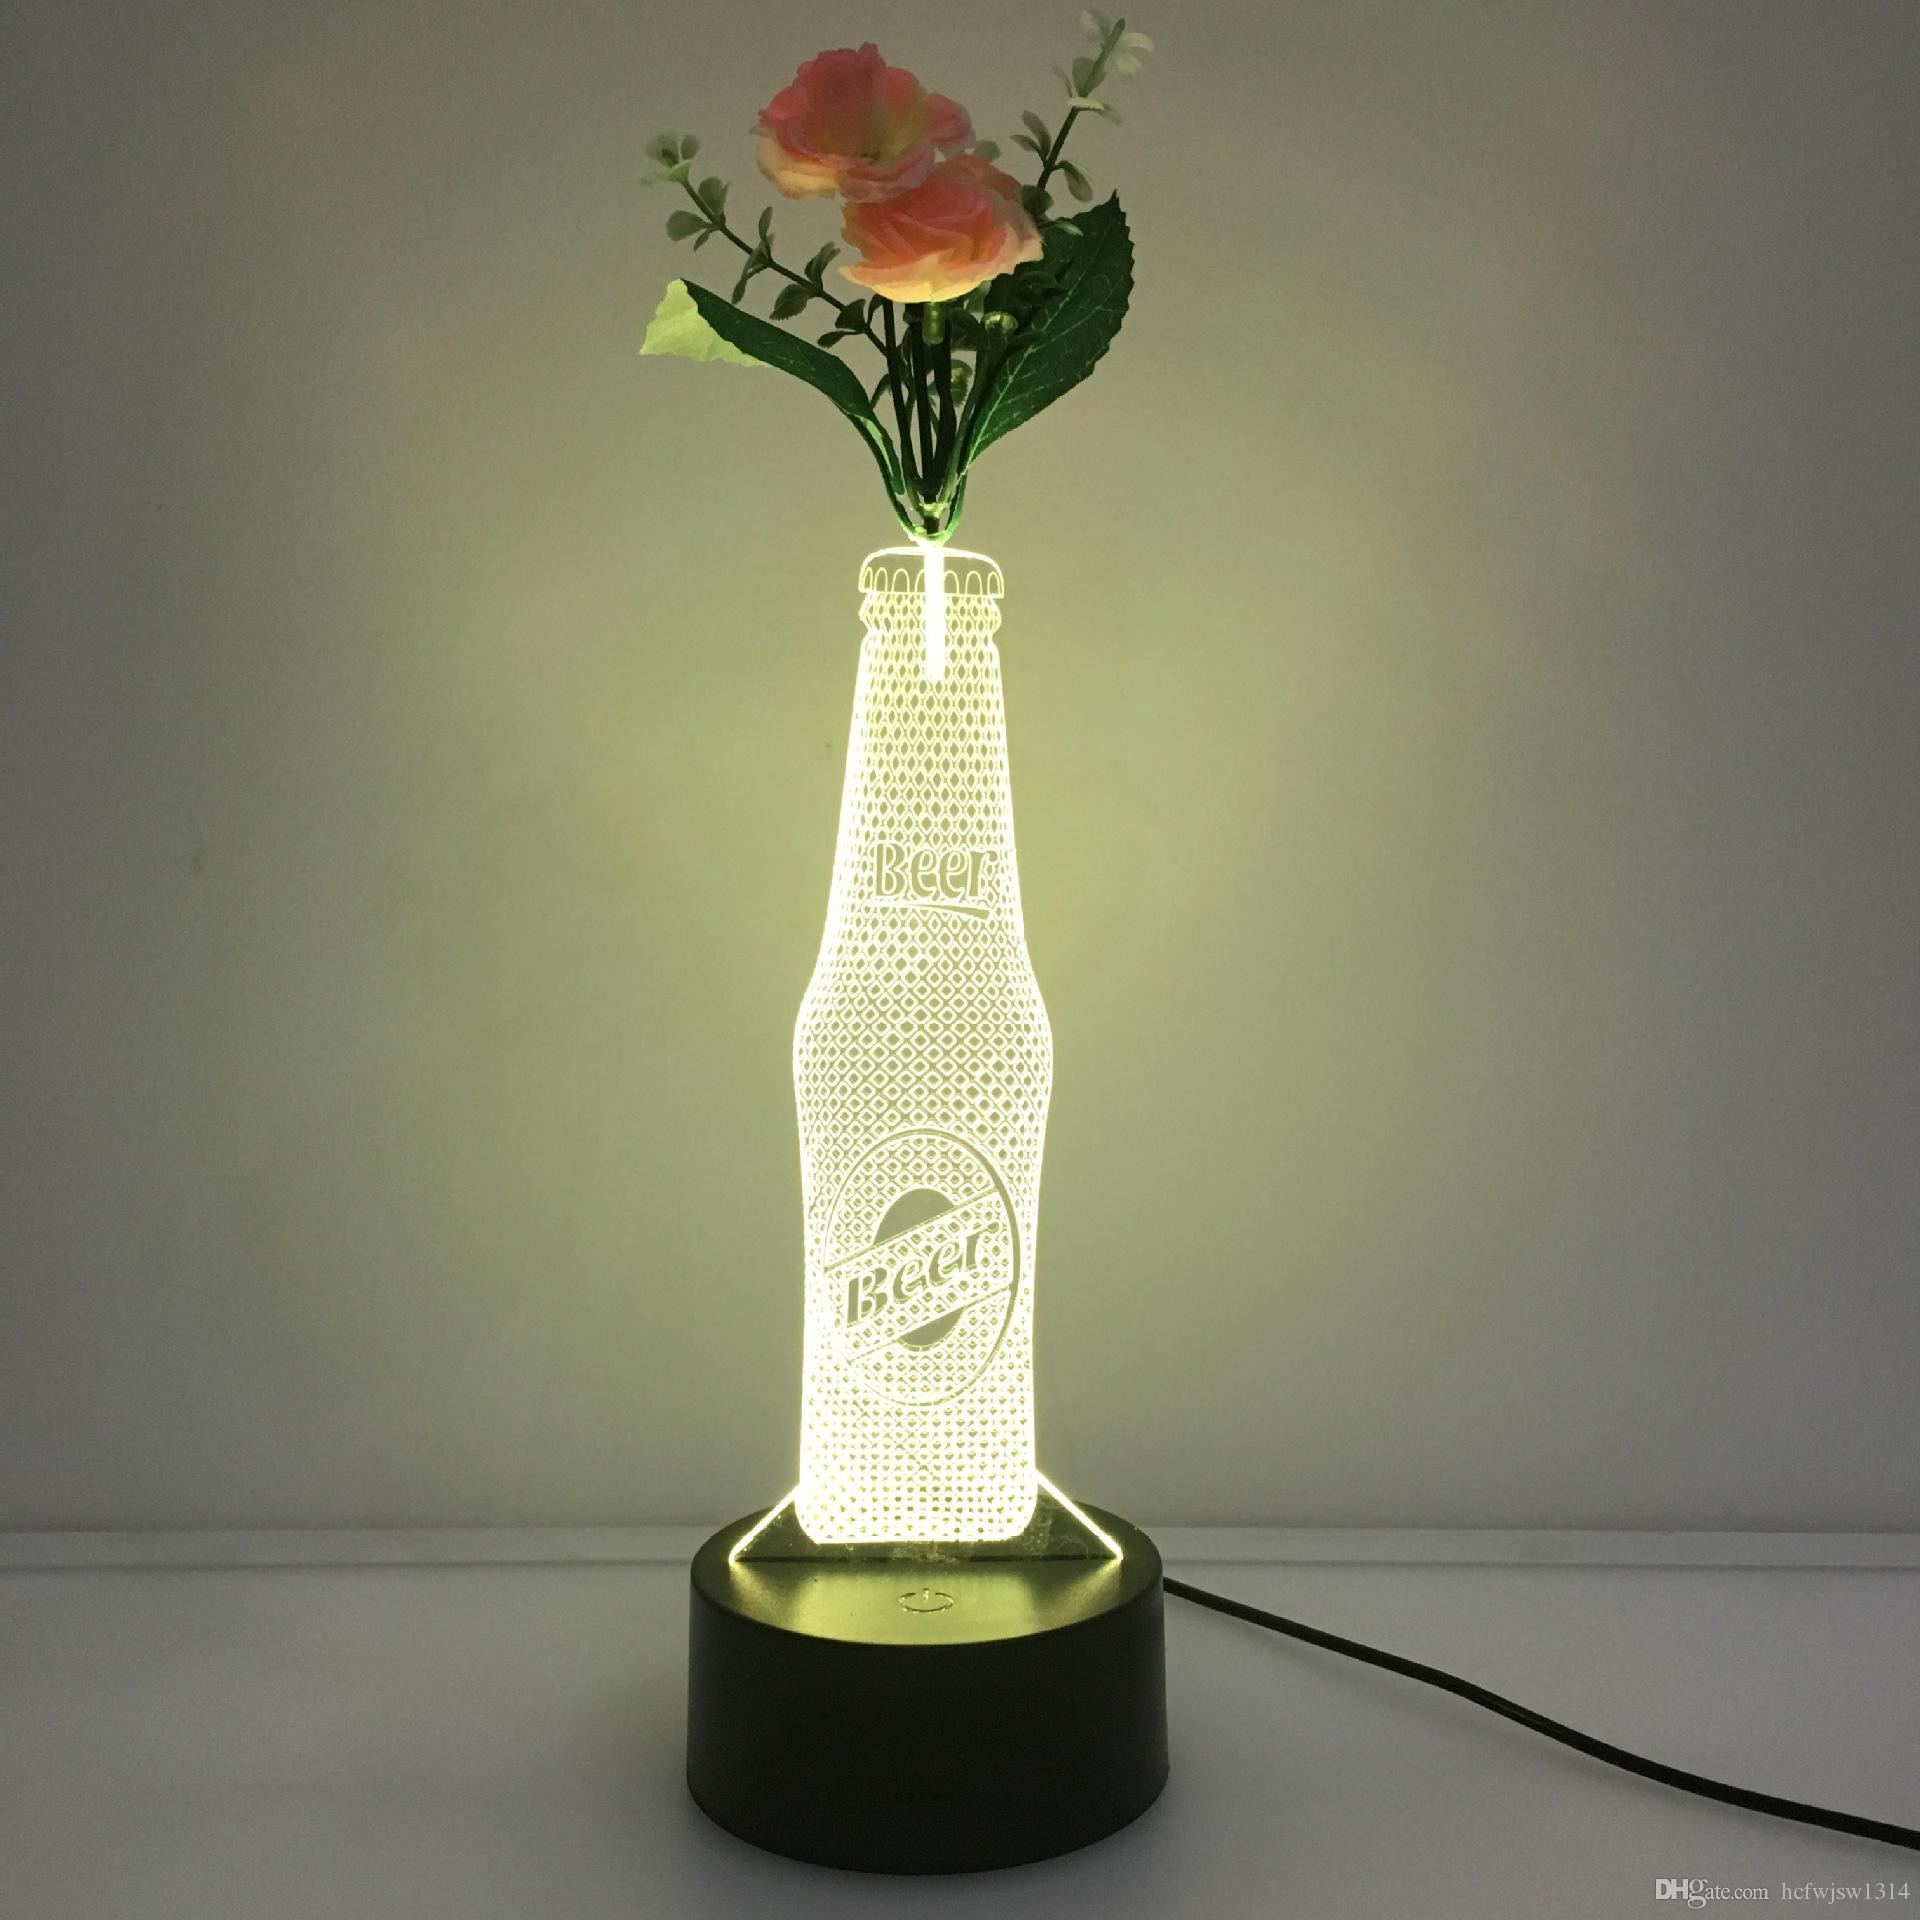 28 Spectacular Wine Bottle Vase 2024 free download wine bottle vase of new wine bottle led vase stereo light colorful acrylic 3d night intended for new wine bottle led vase stereo light colorful acrylic 3d night light gift table lamp